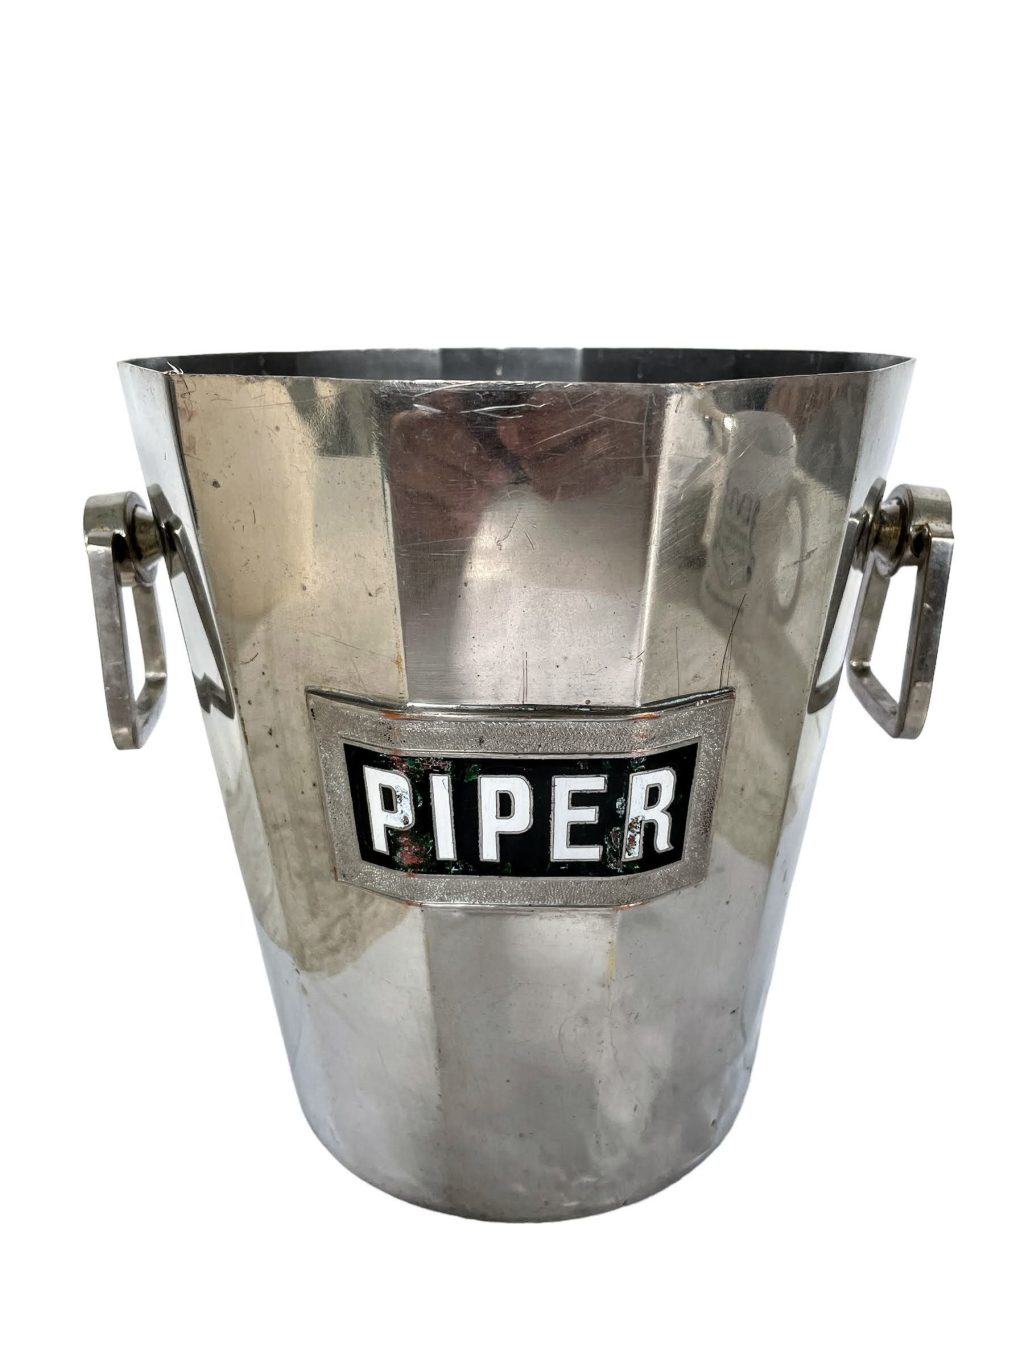 Vintage Champagne Piper French Metal Wine Ice Bucket Cooler Display Stand Pot c1980-90’s